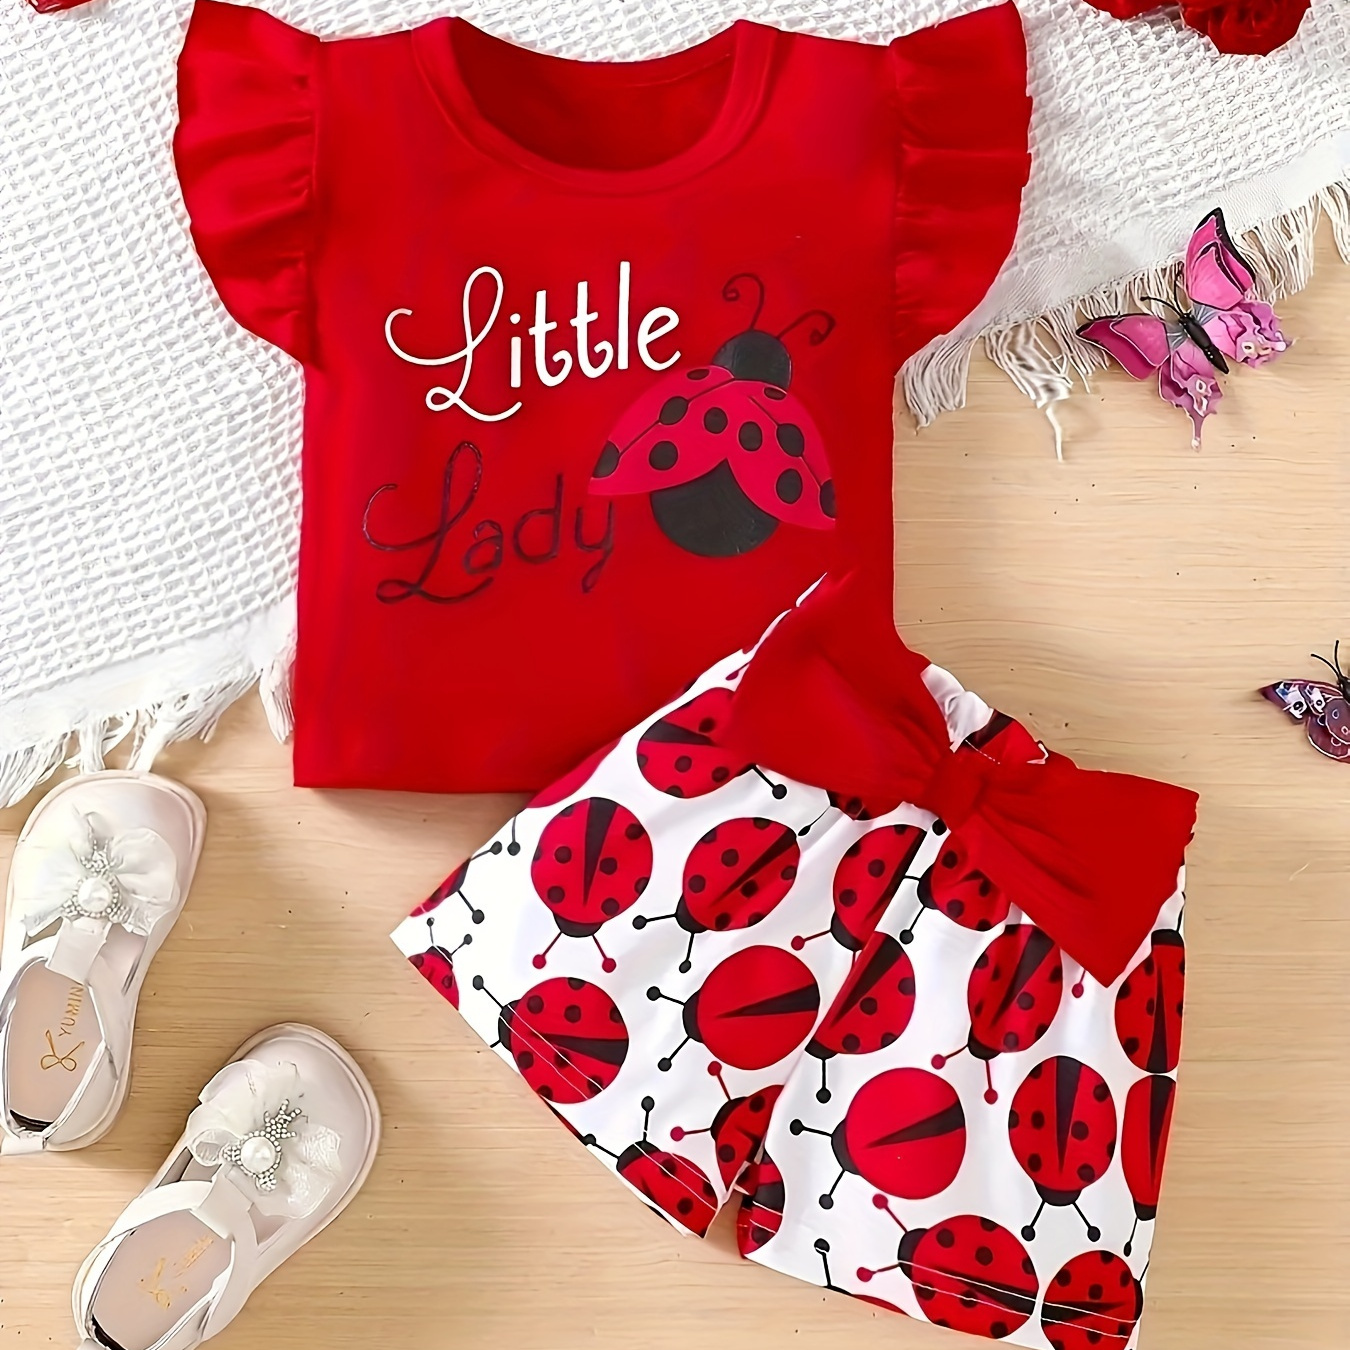 

Baby's "little Lady" Print 2pcs Casual Summer Outfit, Cap Sleeve Top & Bowknot Decor Shorts Set, Toddler & Infant Girl's Clothes For Daily/holiday/party